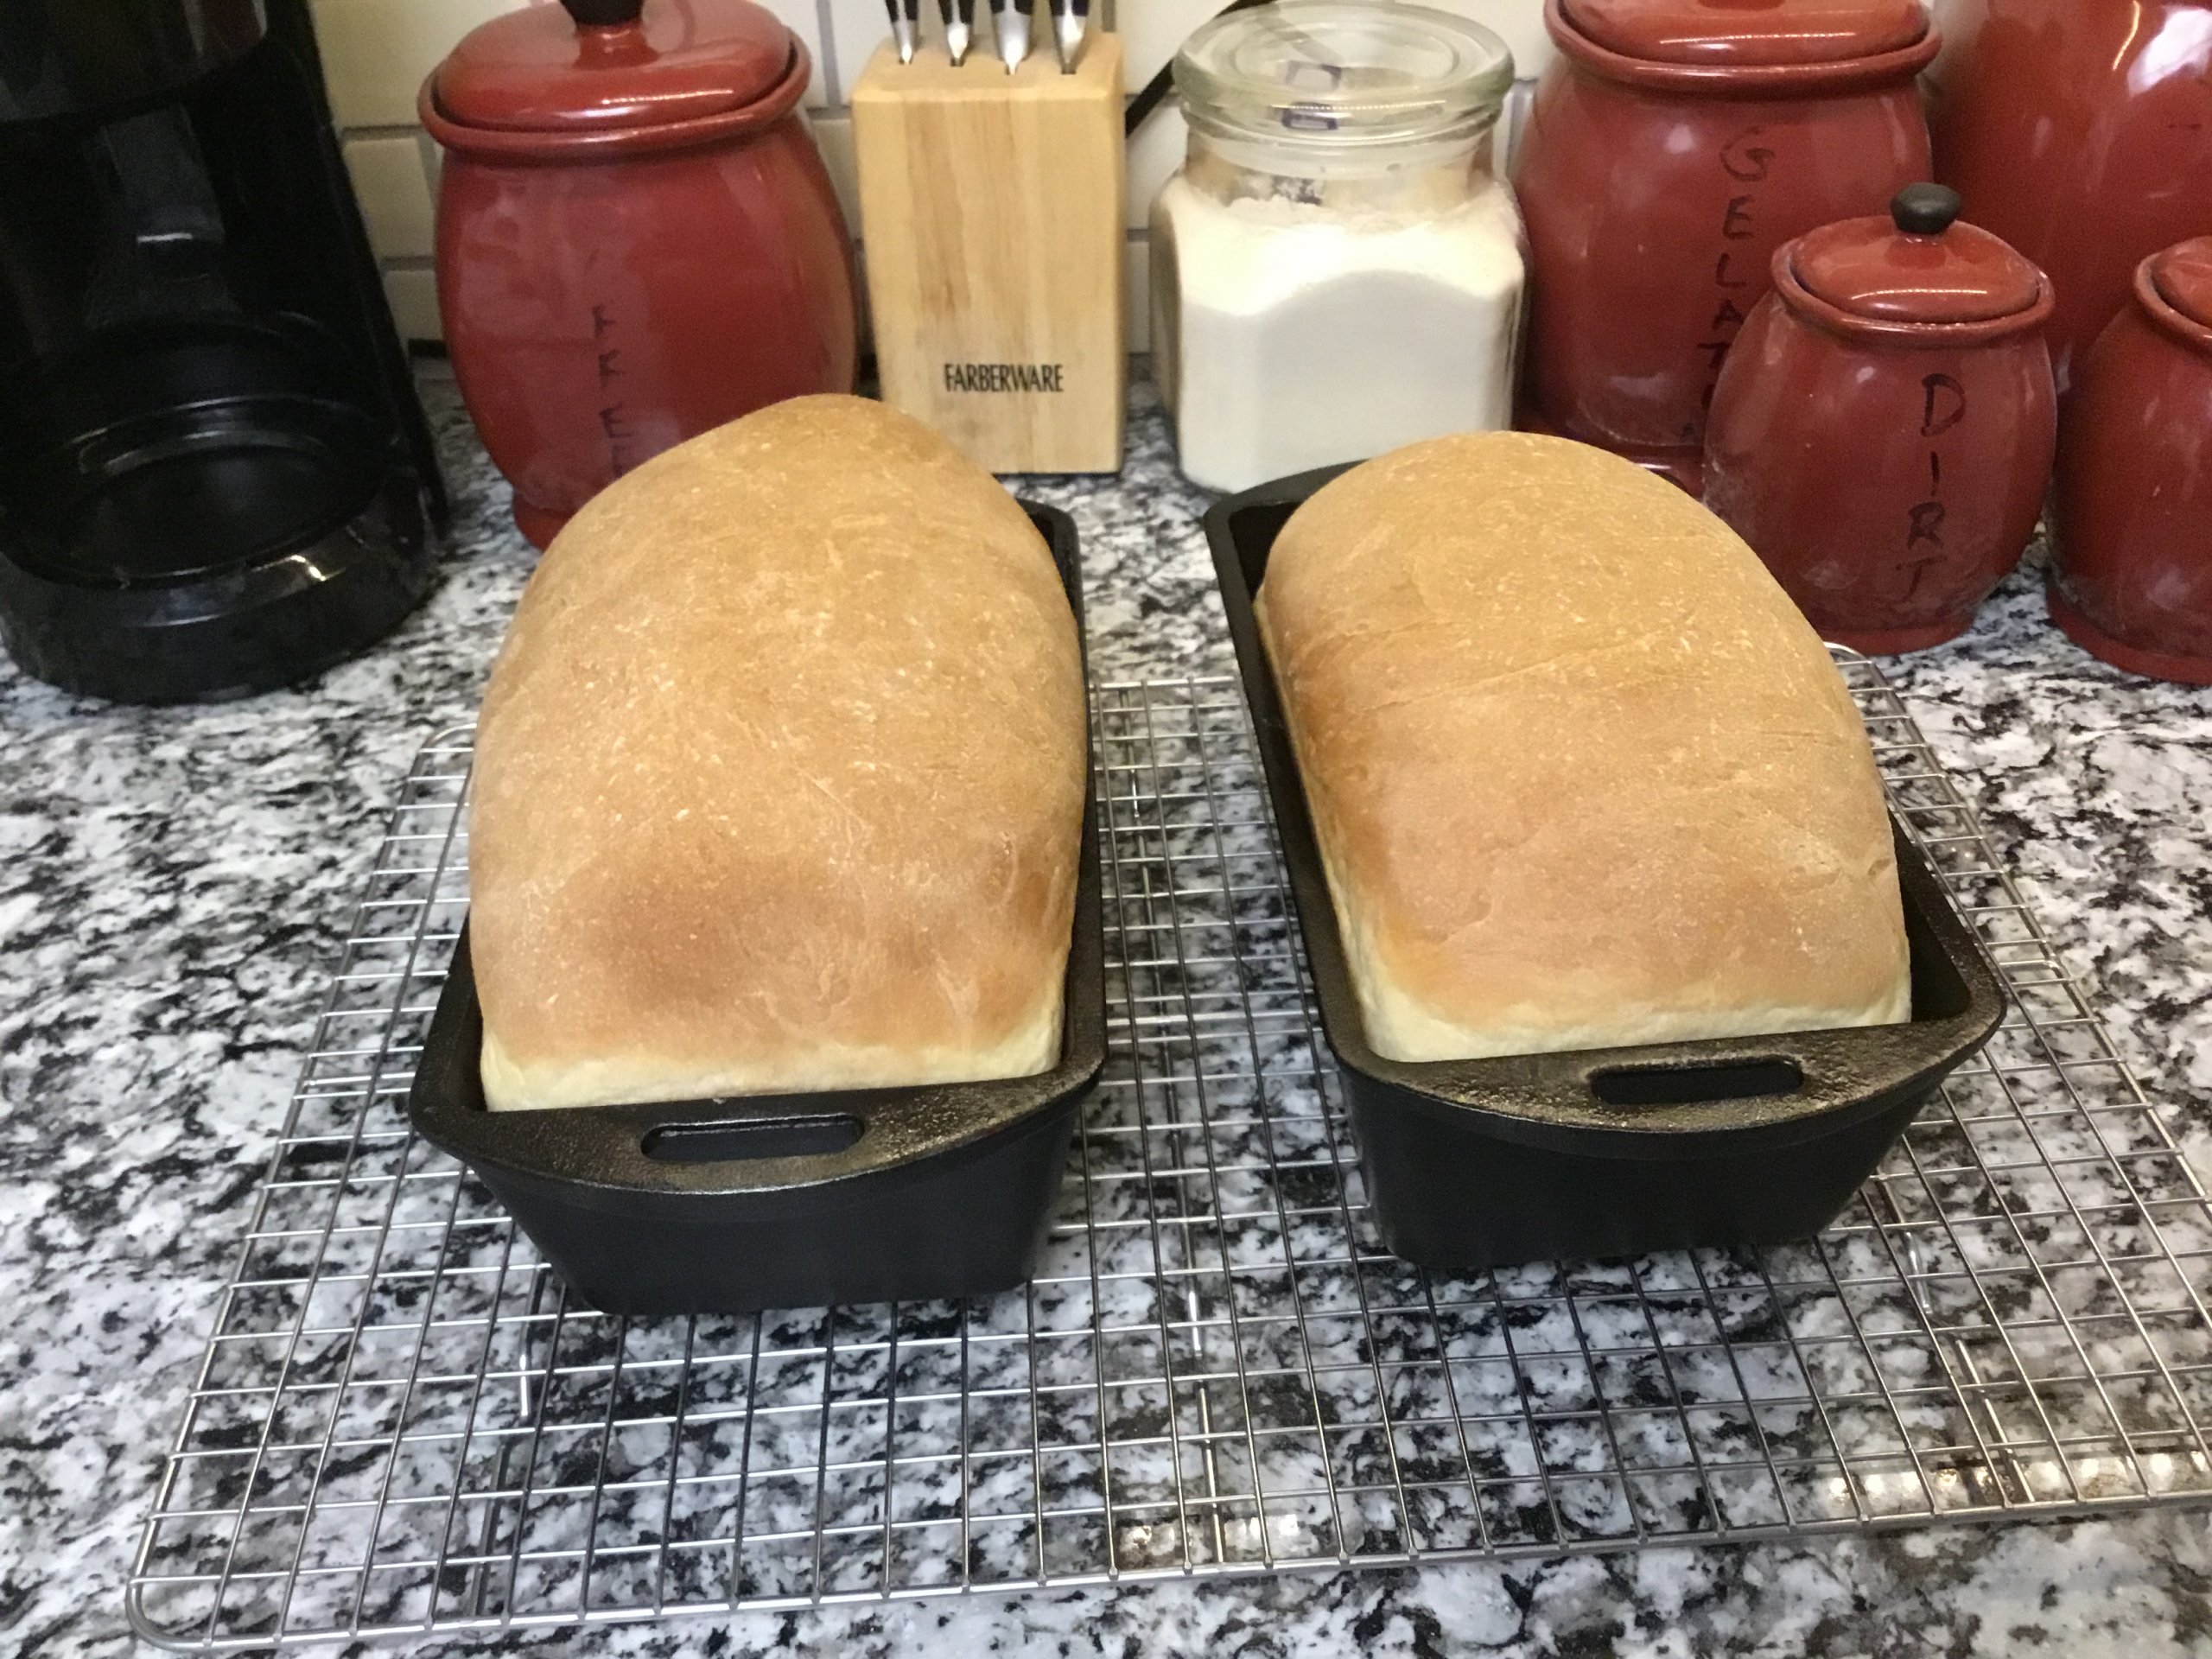 Homemade white bread right from the oven